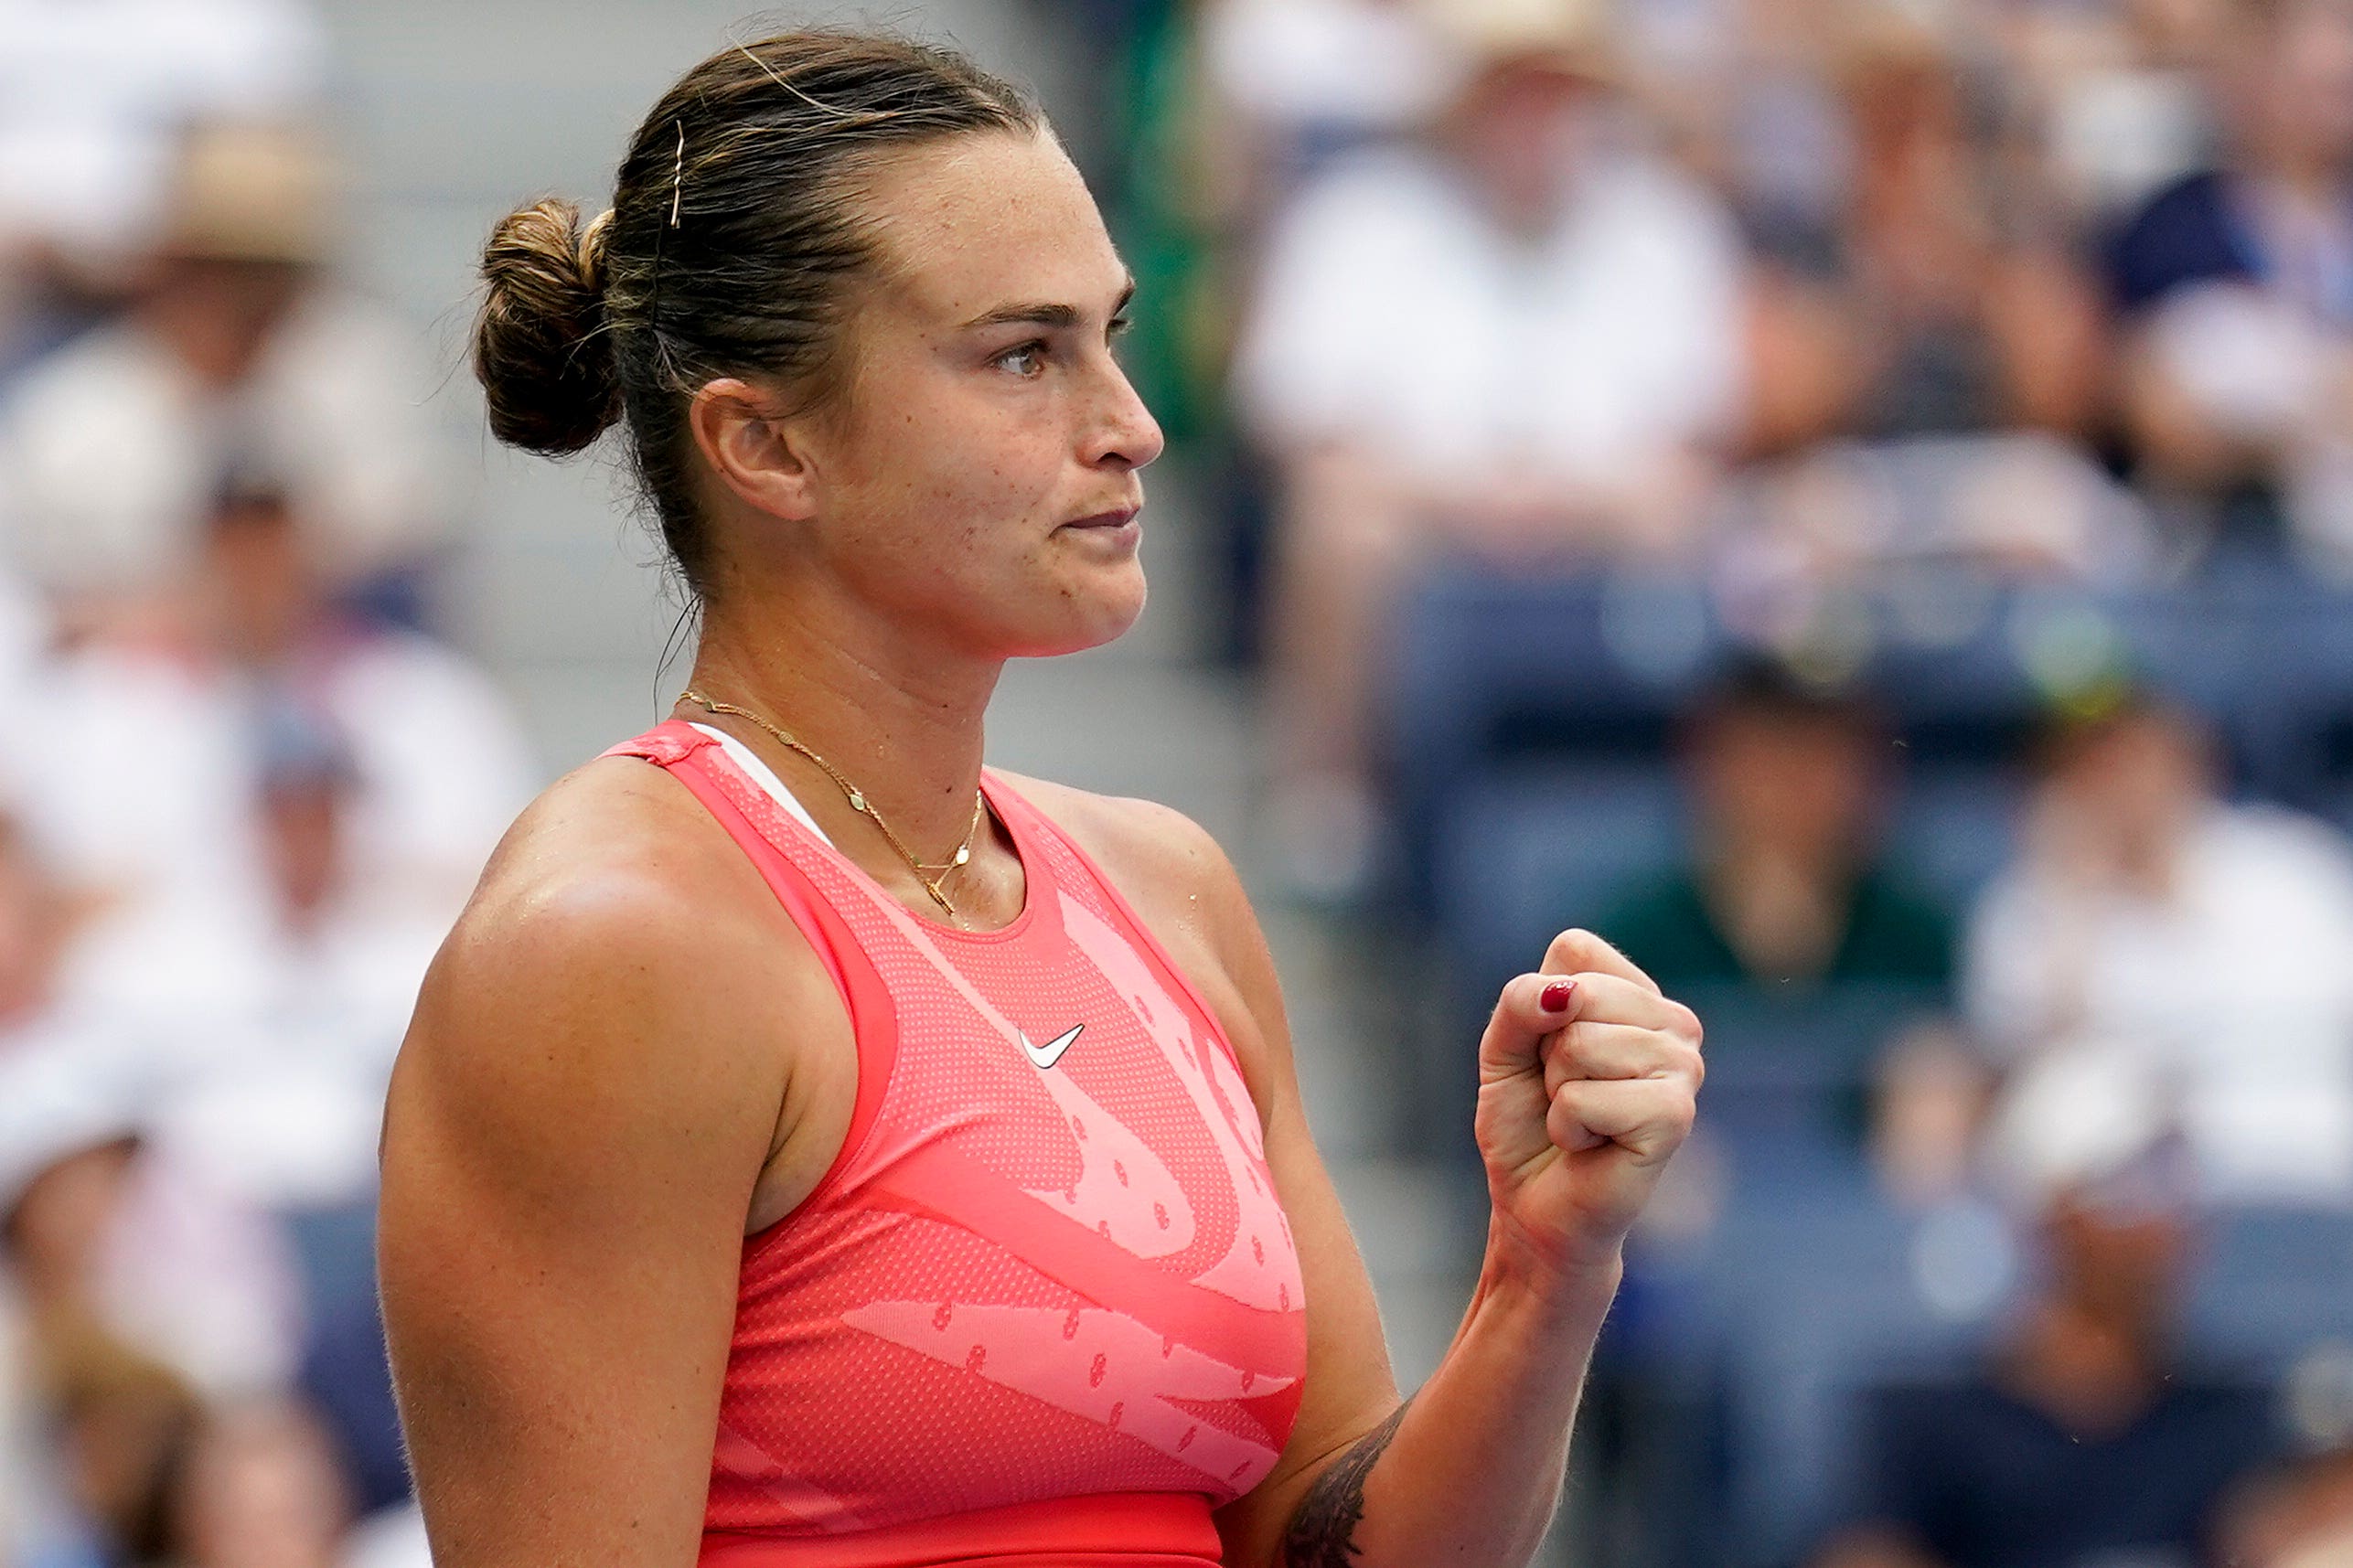 Aryna Sabalenka eases into US Open semifinals with win over Zheng